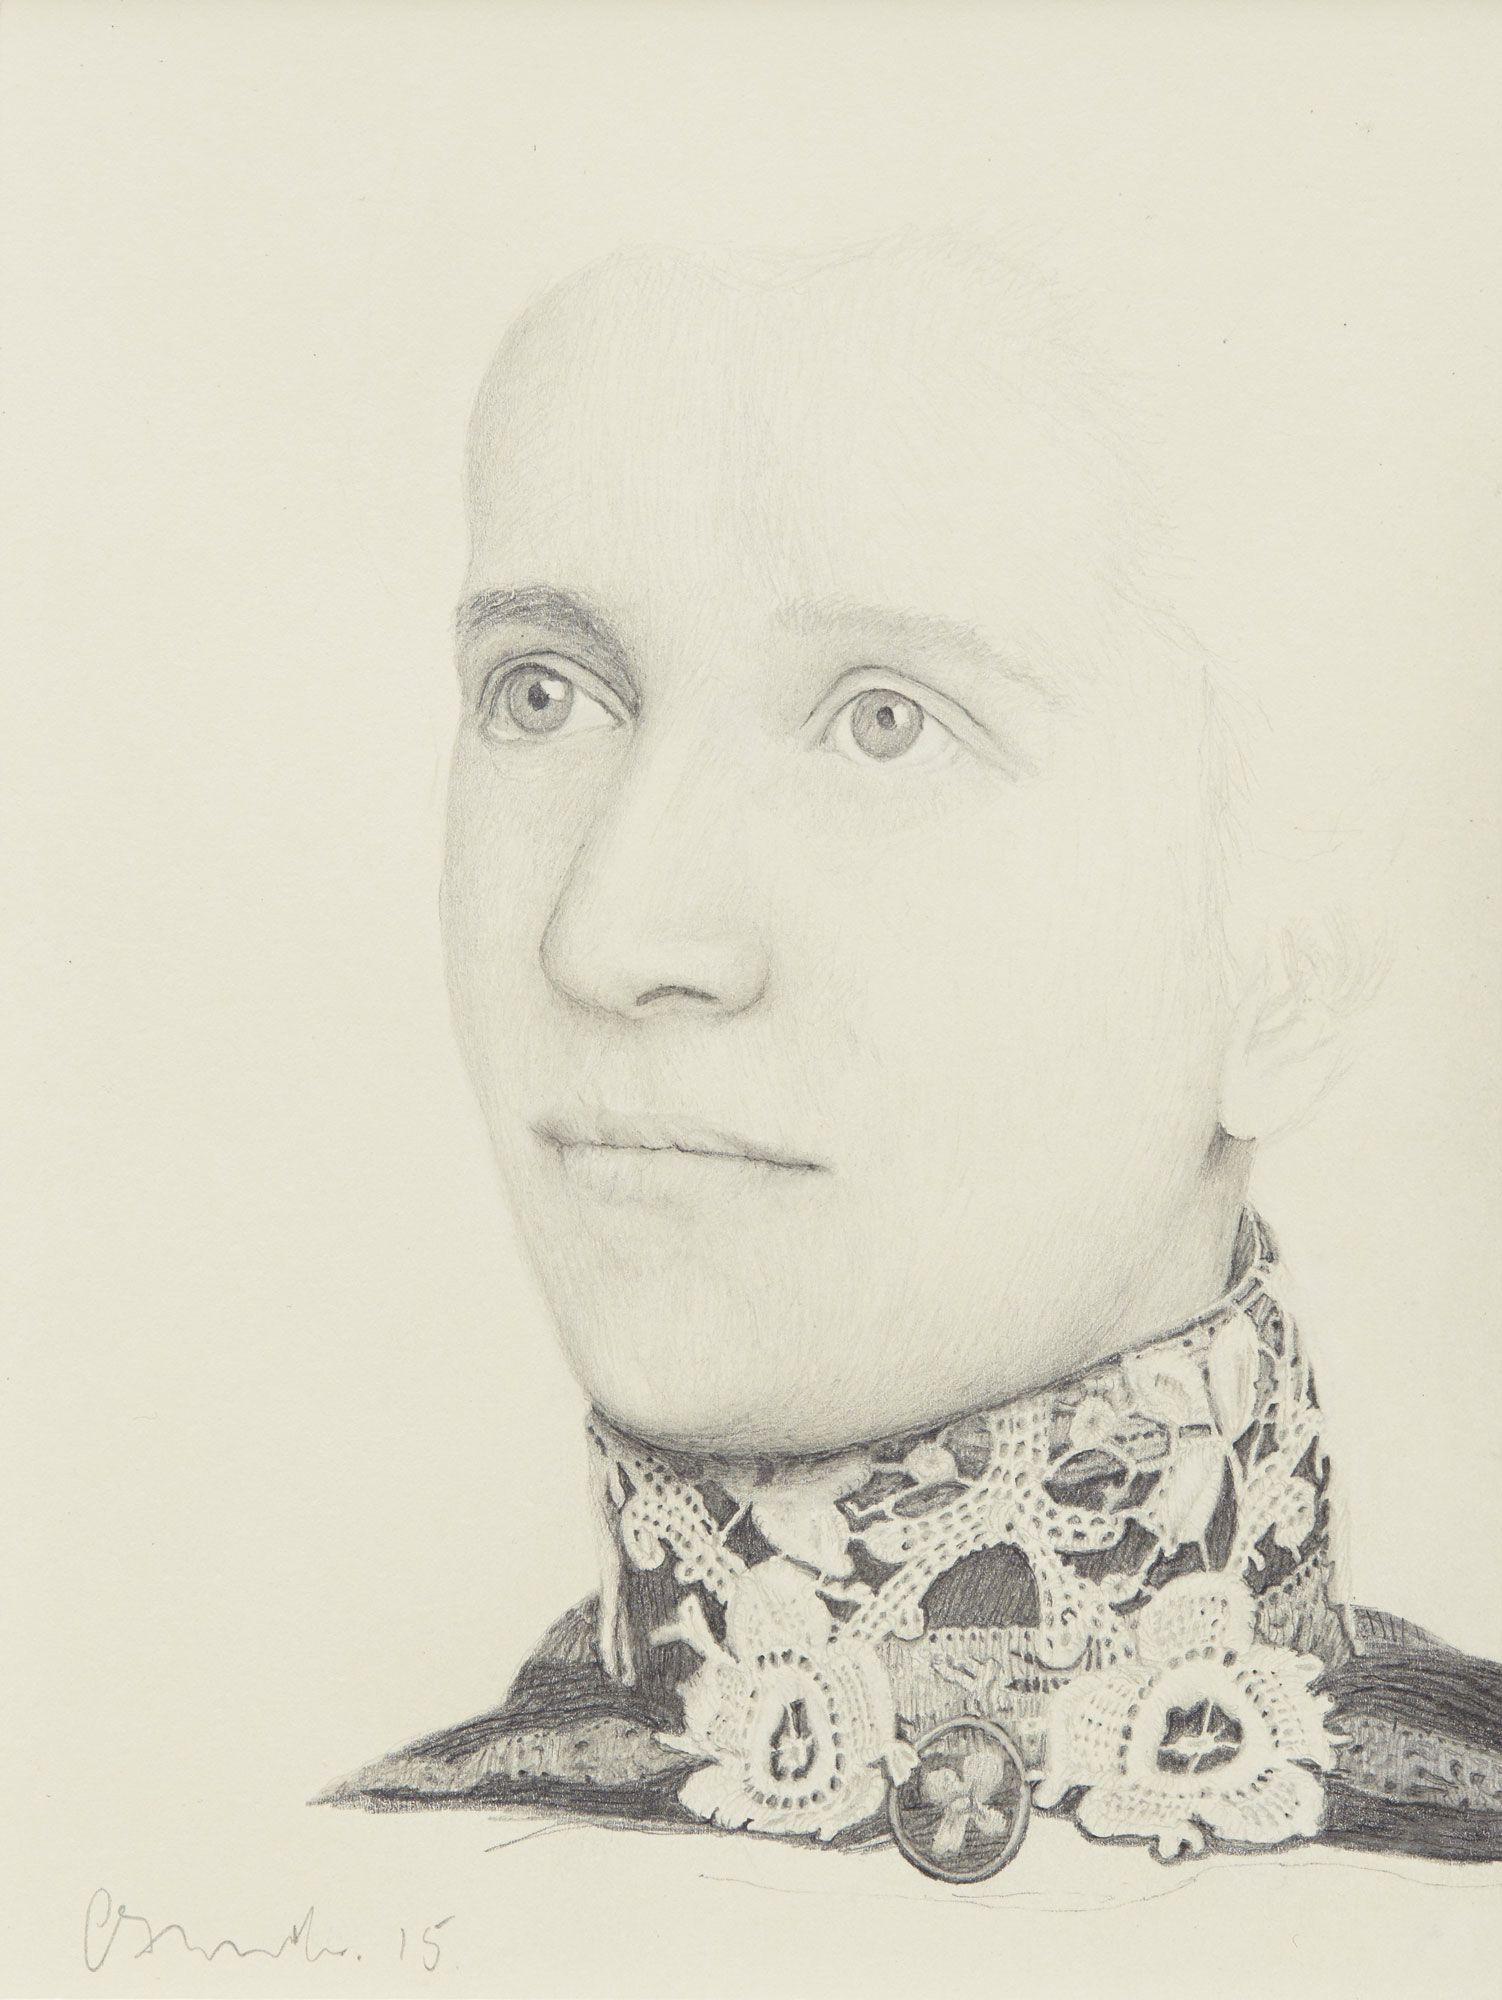 Pencil on paper drawing of German woman with fancy neck attire.